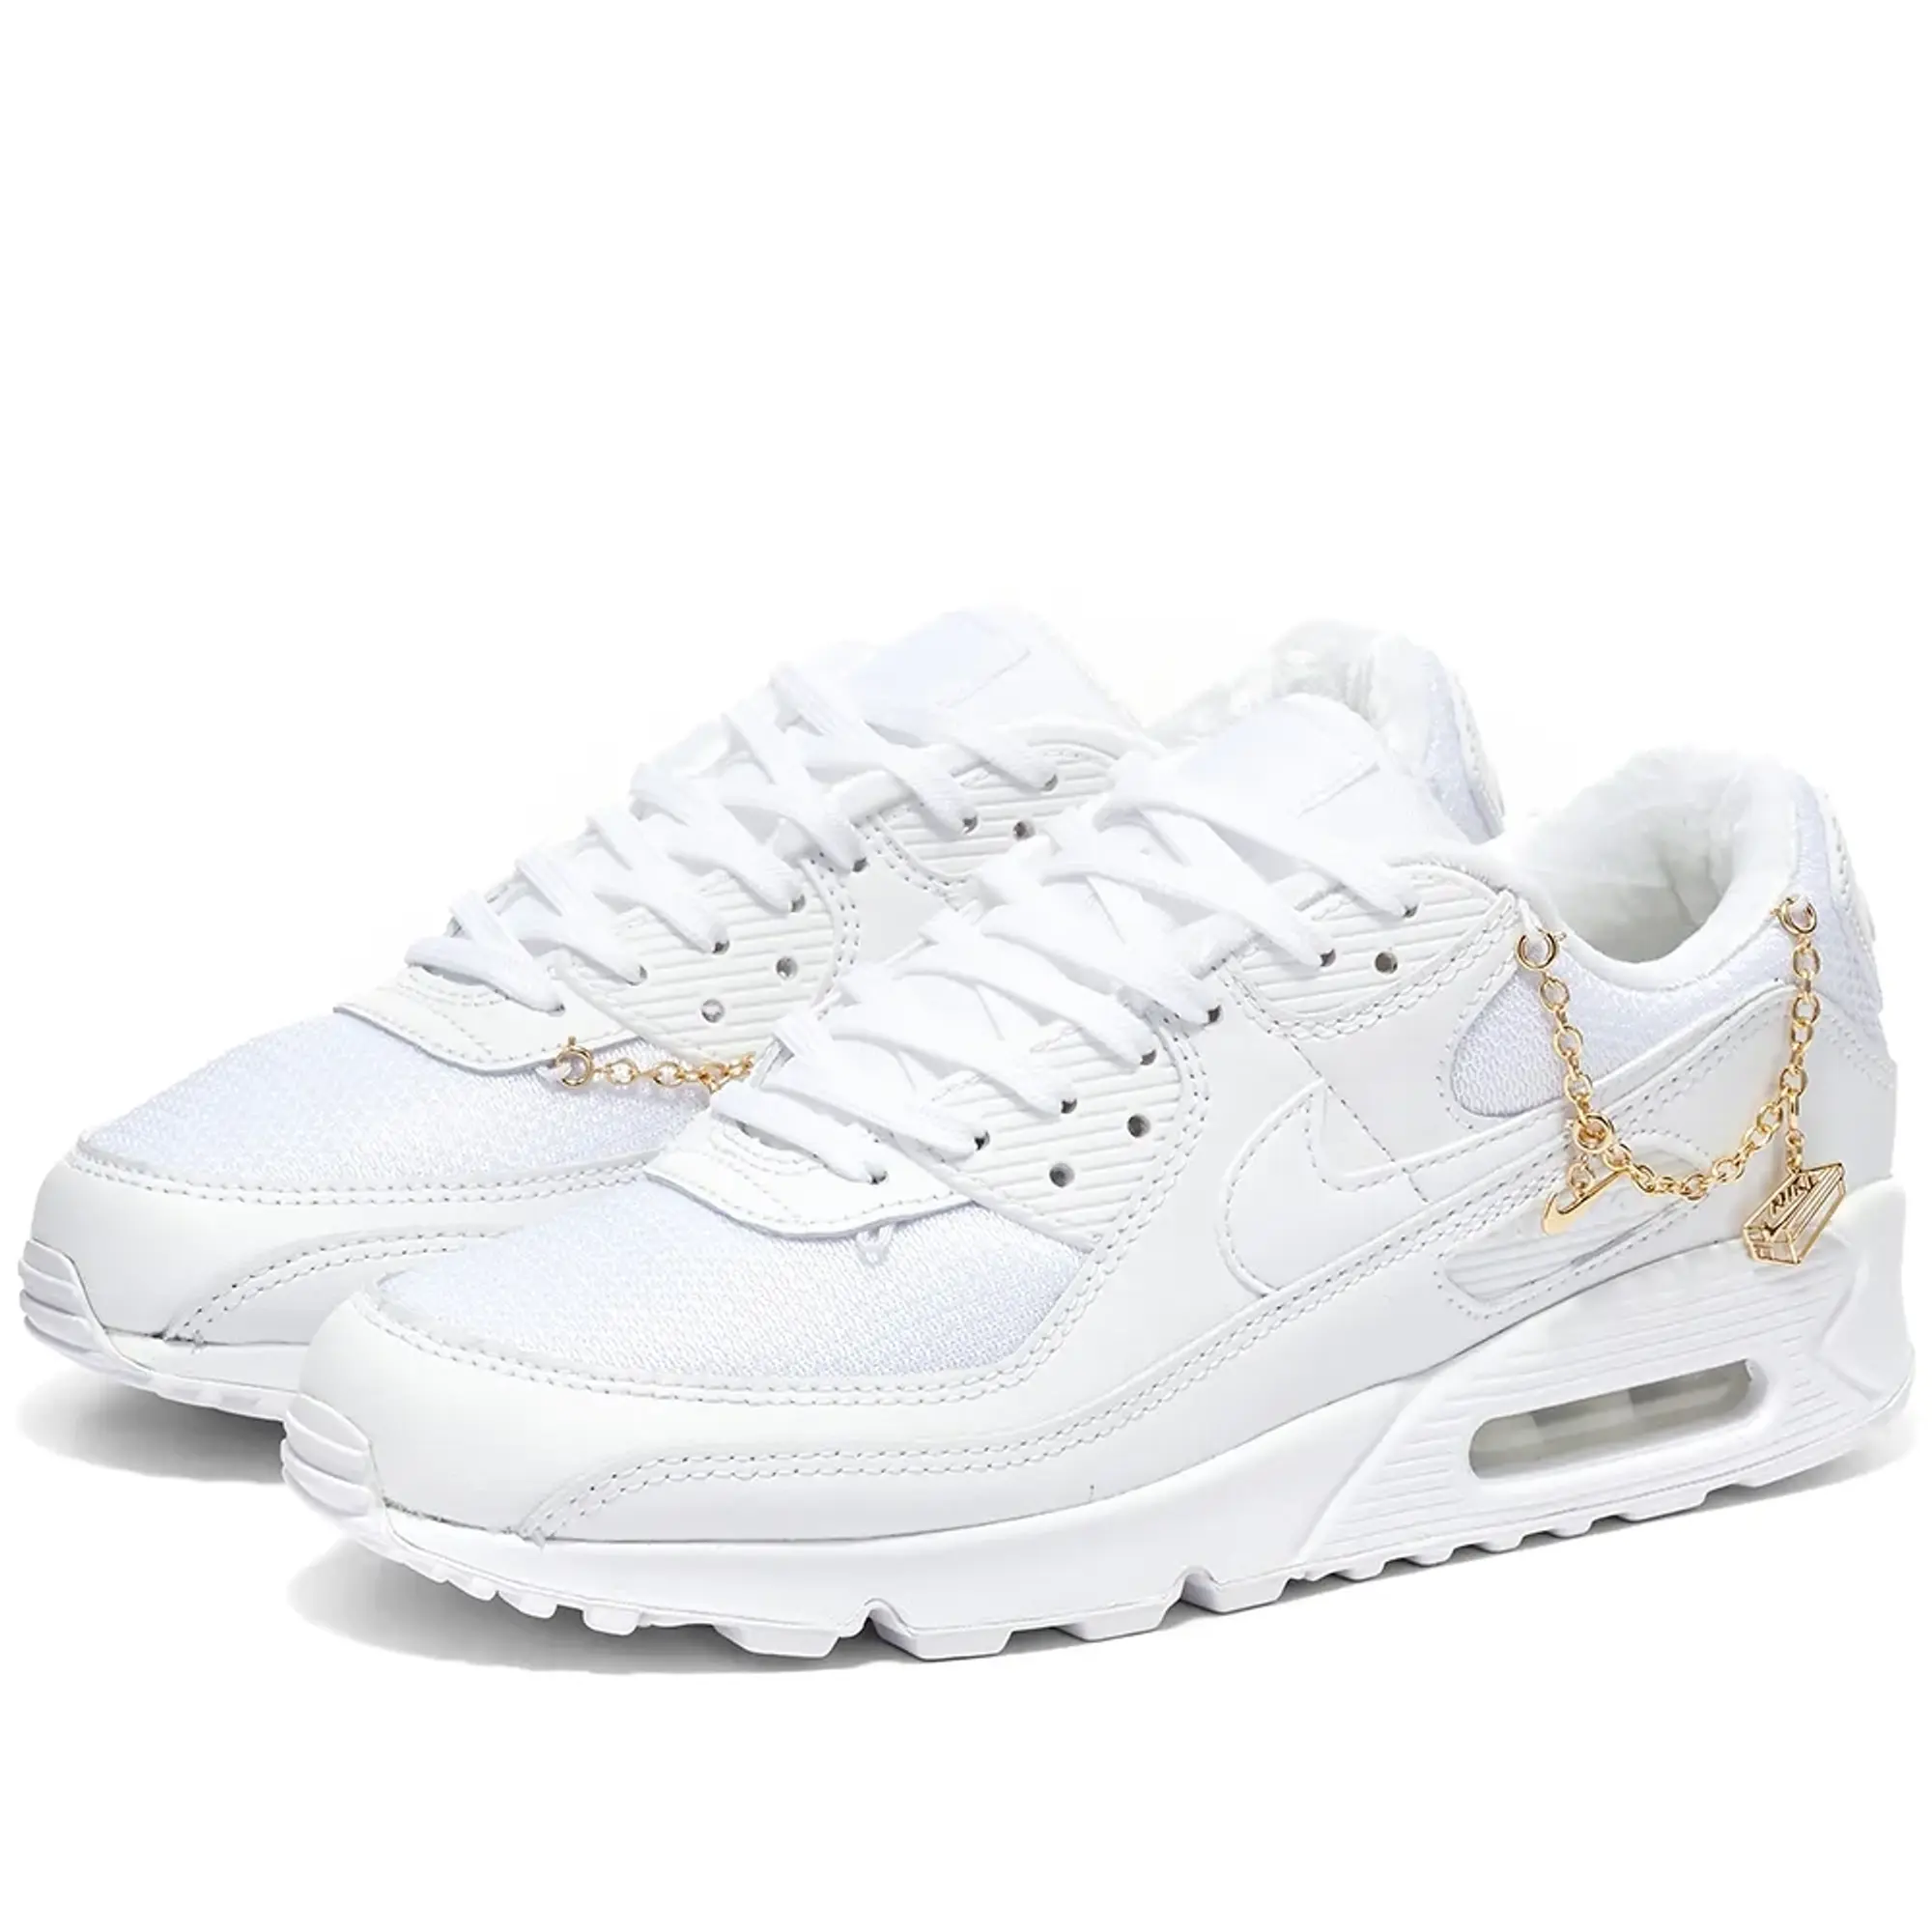 Nike Air Max 90 Lucky Charms WMNS White